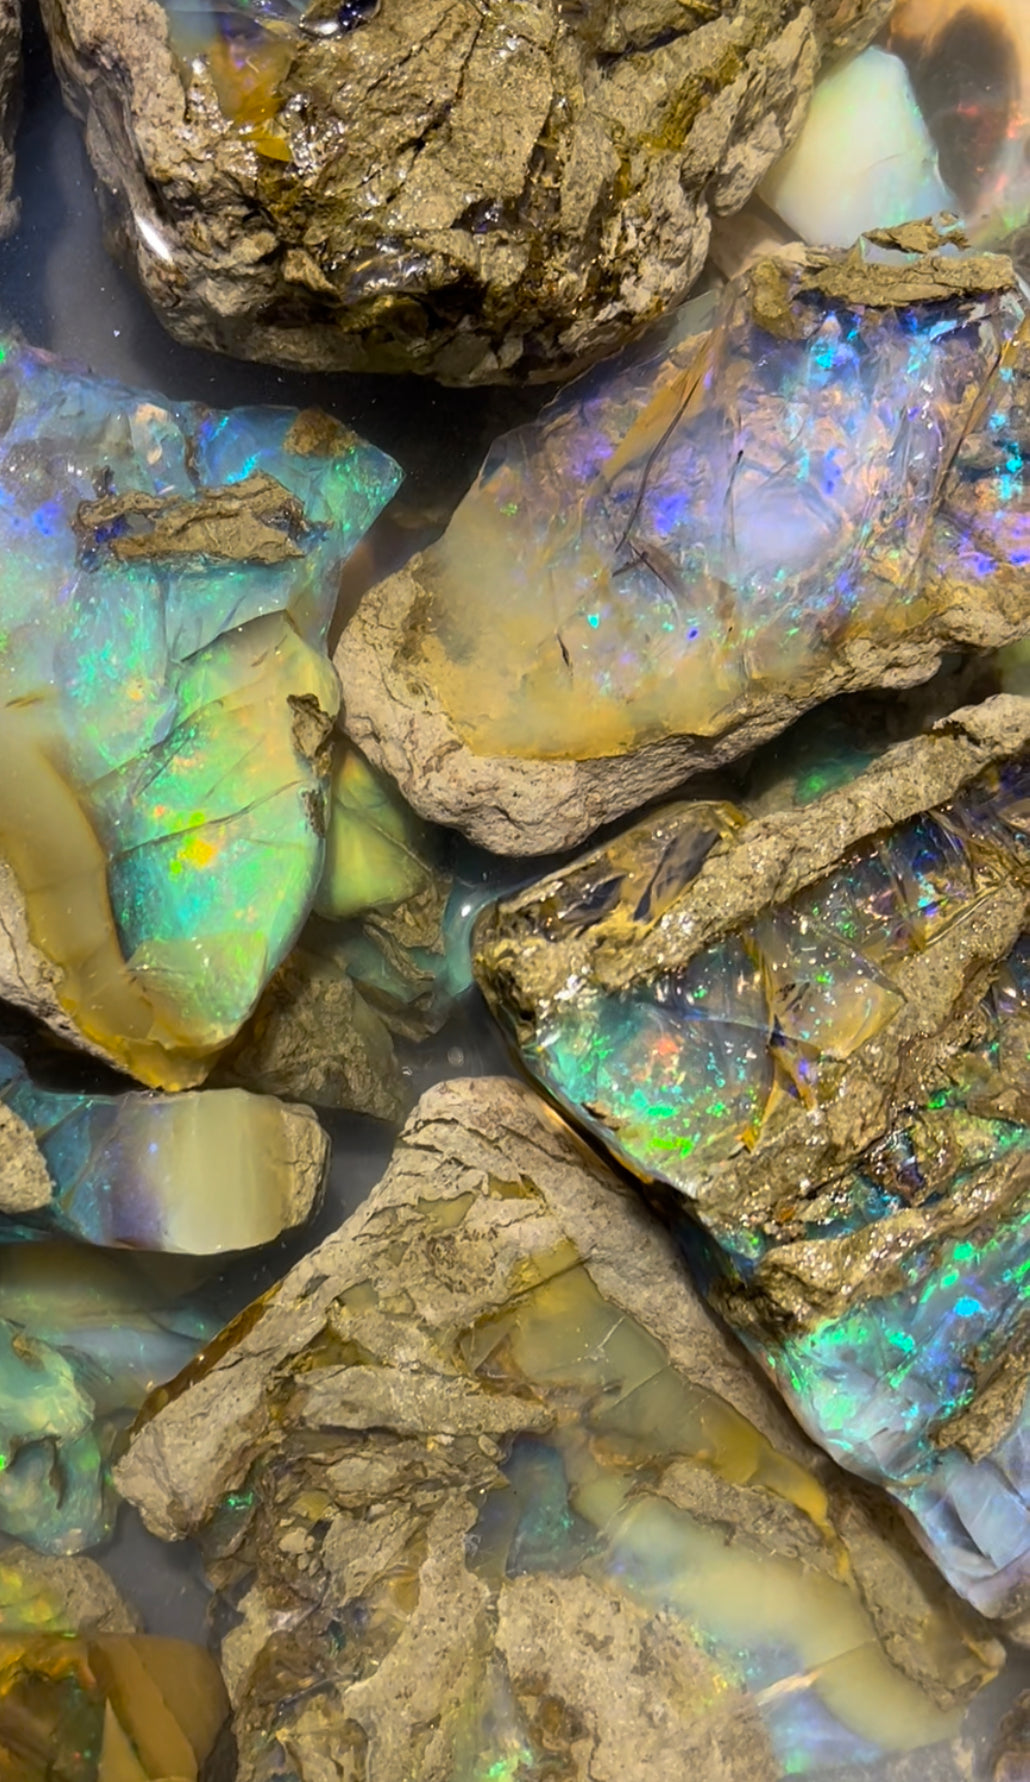 Opal Properties, Meaning, Facts and Photos